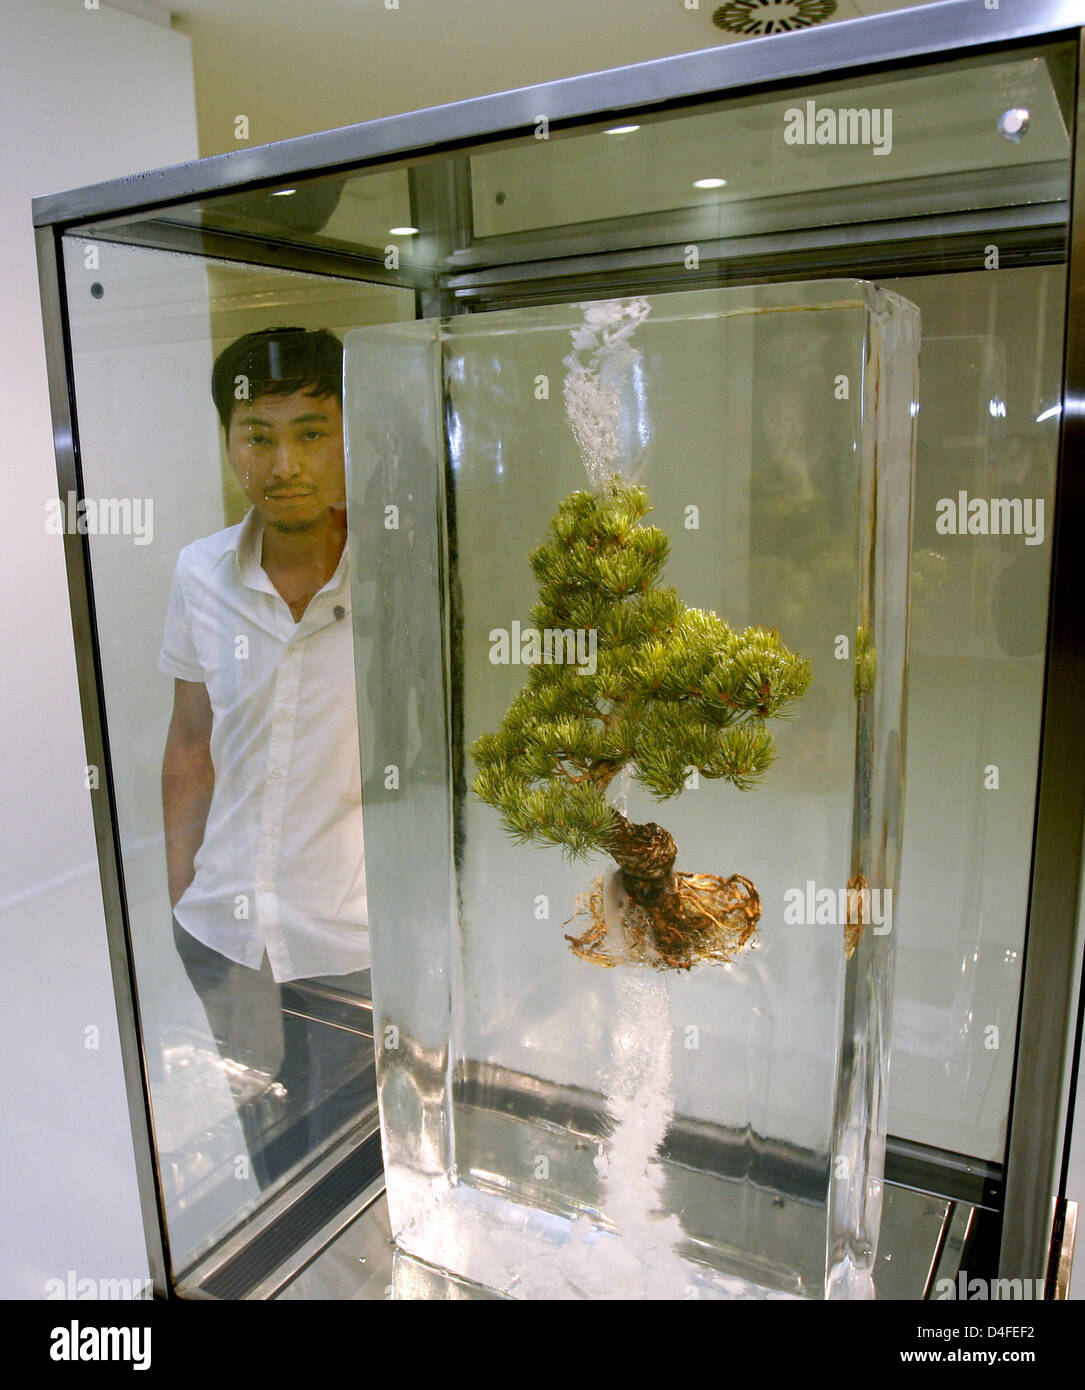 Japanese artist Makoto Azuma stands behind a bonsai in an ice block at the exhibition 'Makoto Azuma: Botanical Sculpture' at the NRW Forum in Duesseldorf, Germany, 04 July 2008. The exhibition runs from 05 July through 03 August 2008. Photo: FRANZ-PETER TSCHAUNER Stock Photo